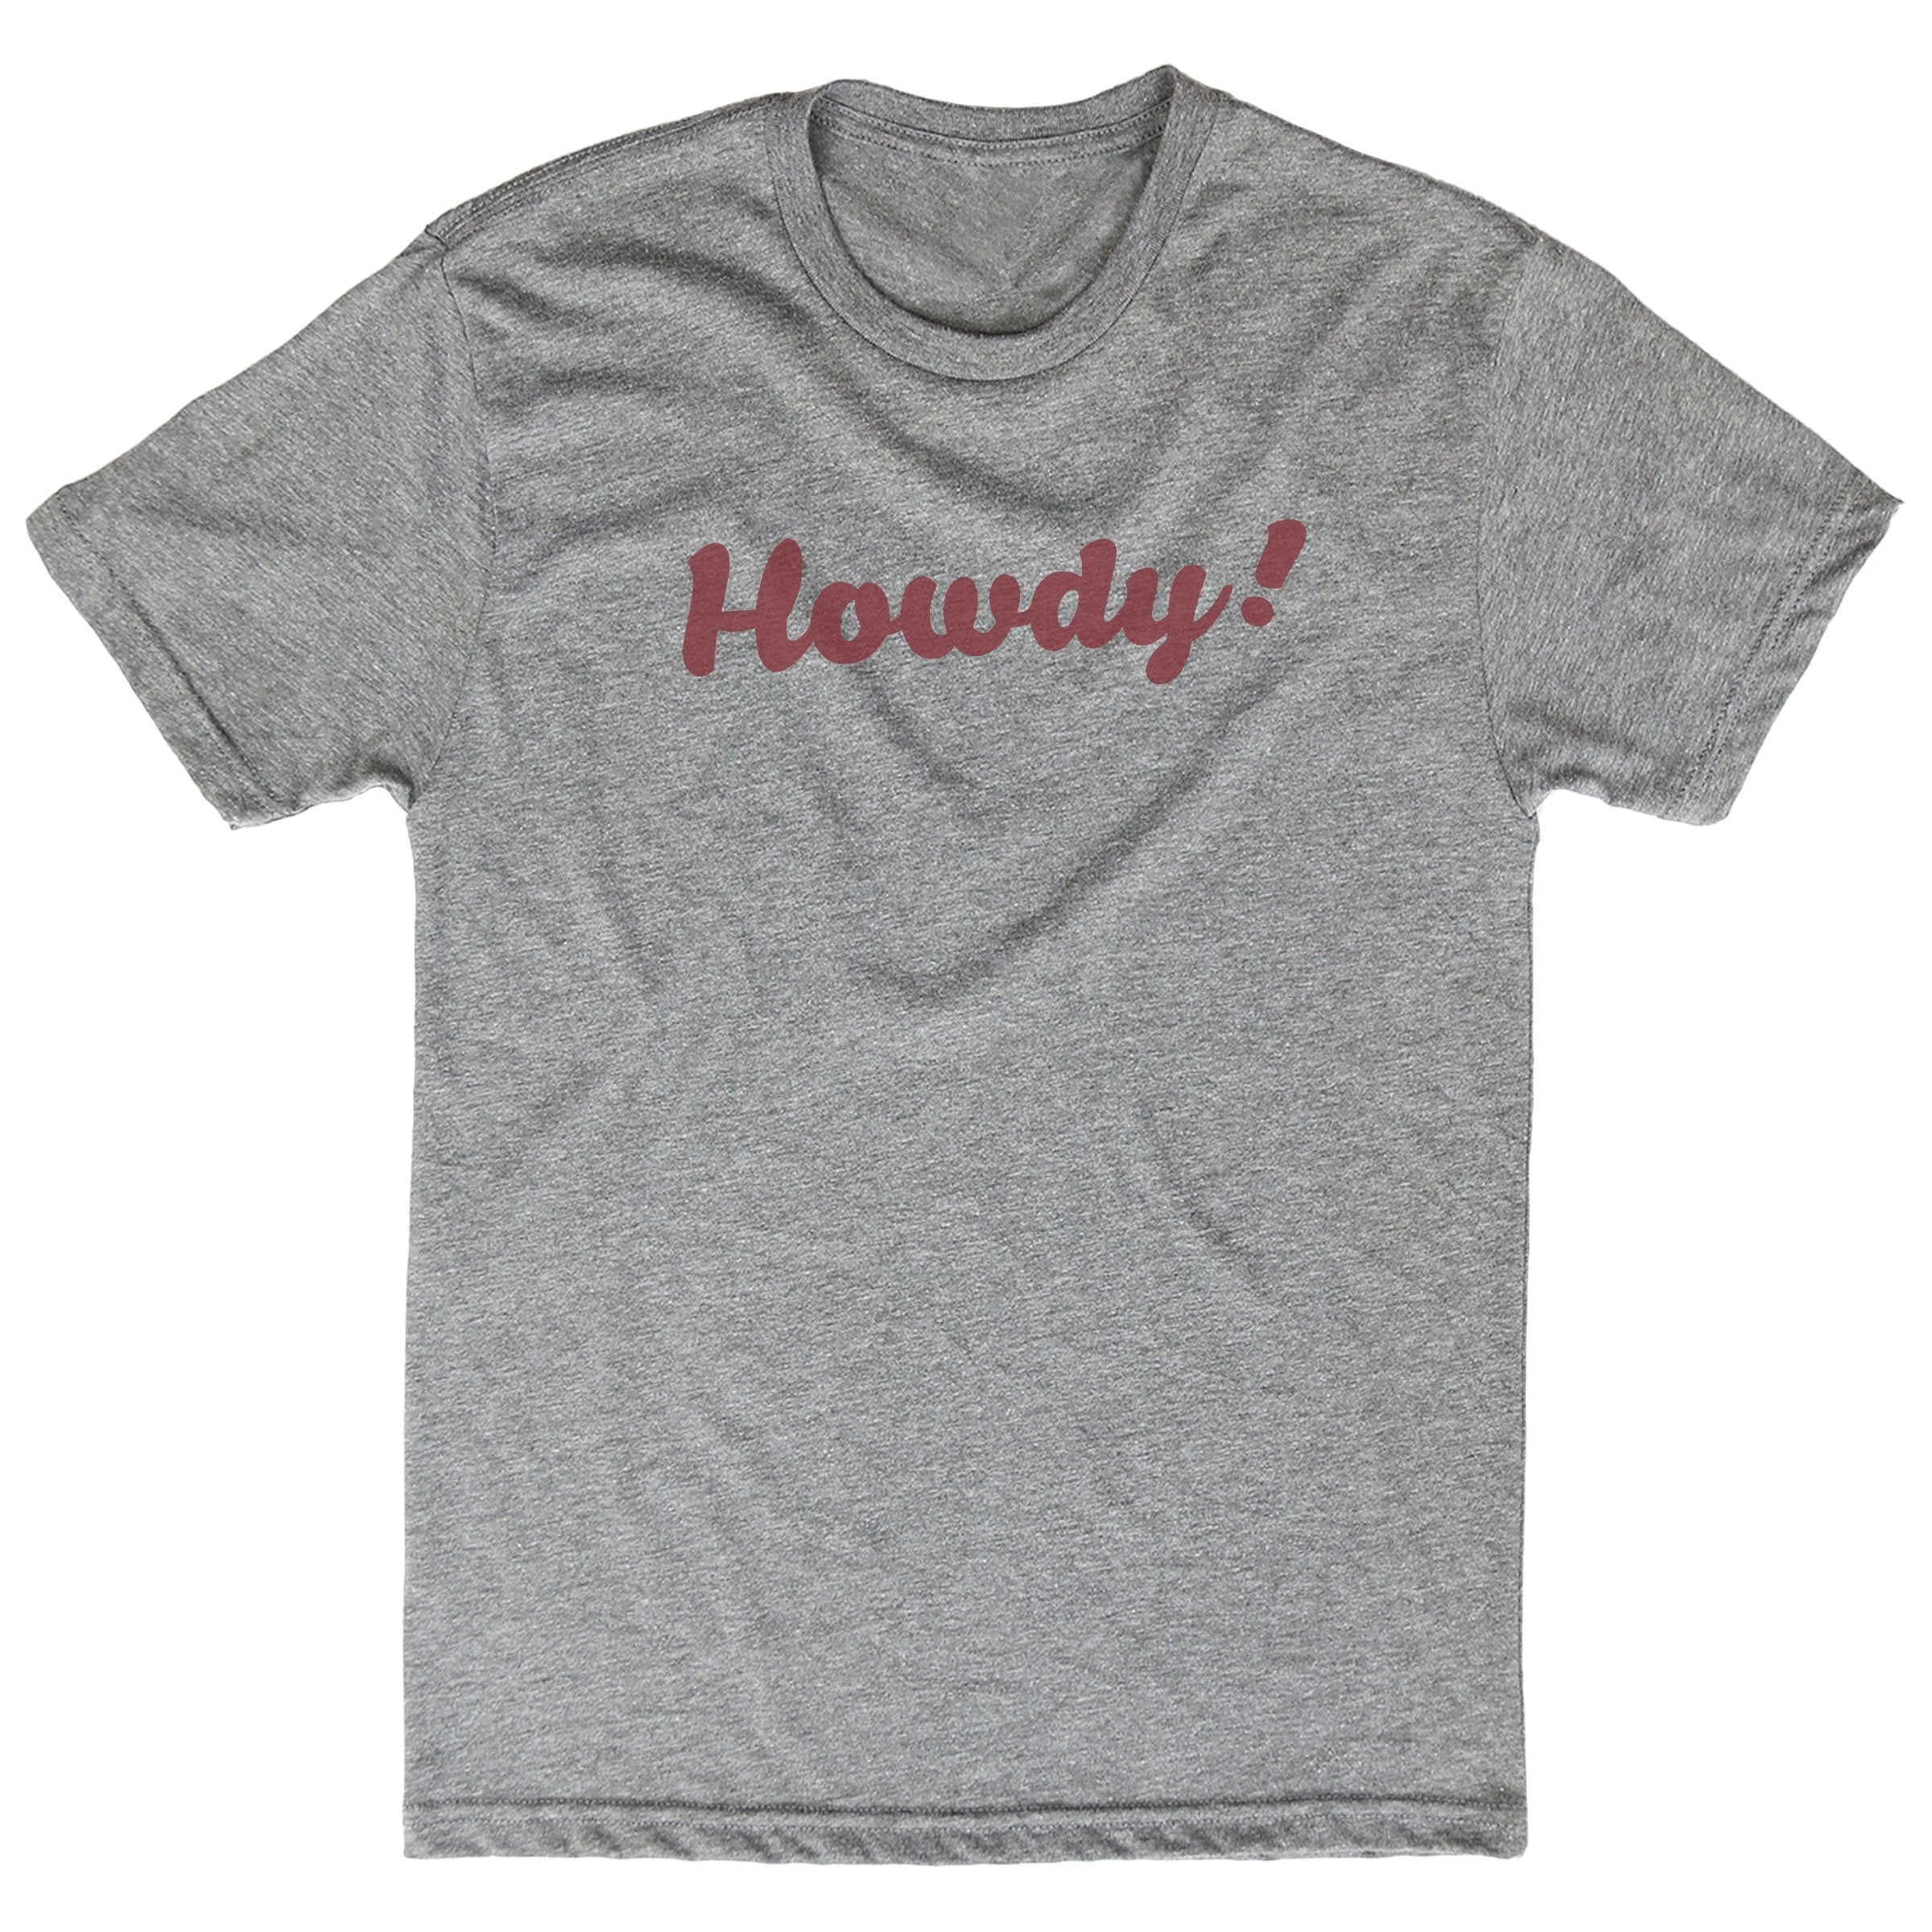 Howdy! Crew neck The Home T XS Ath Grey Crew Neck T-Shirt